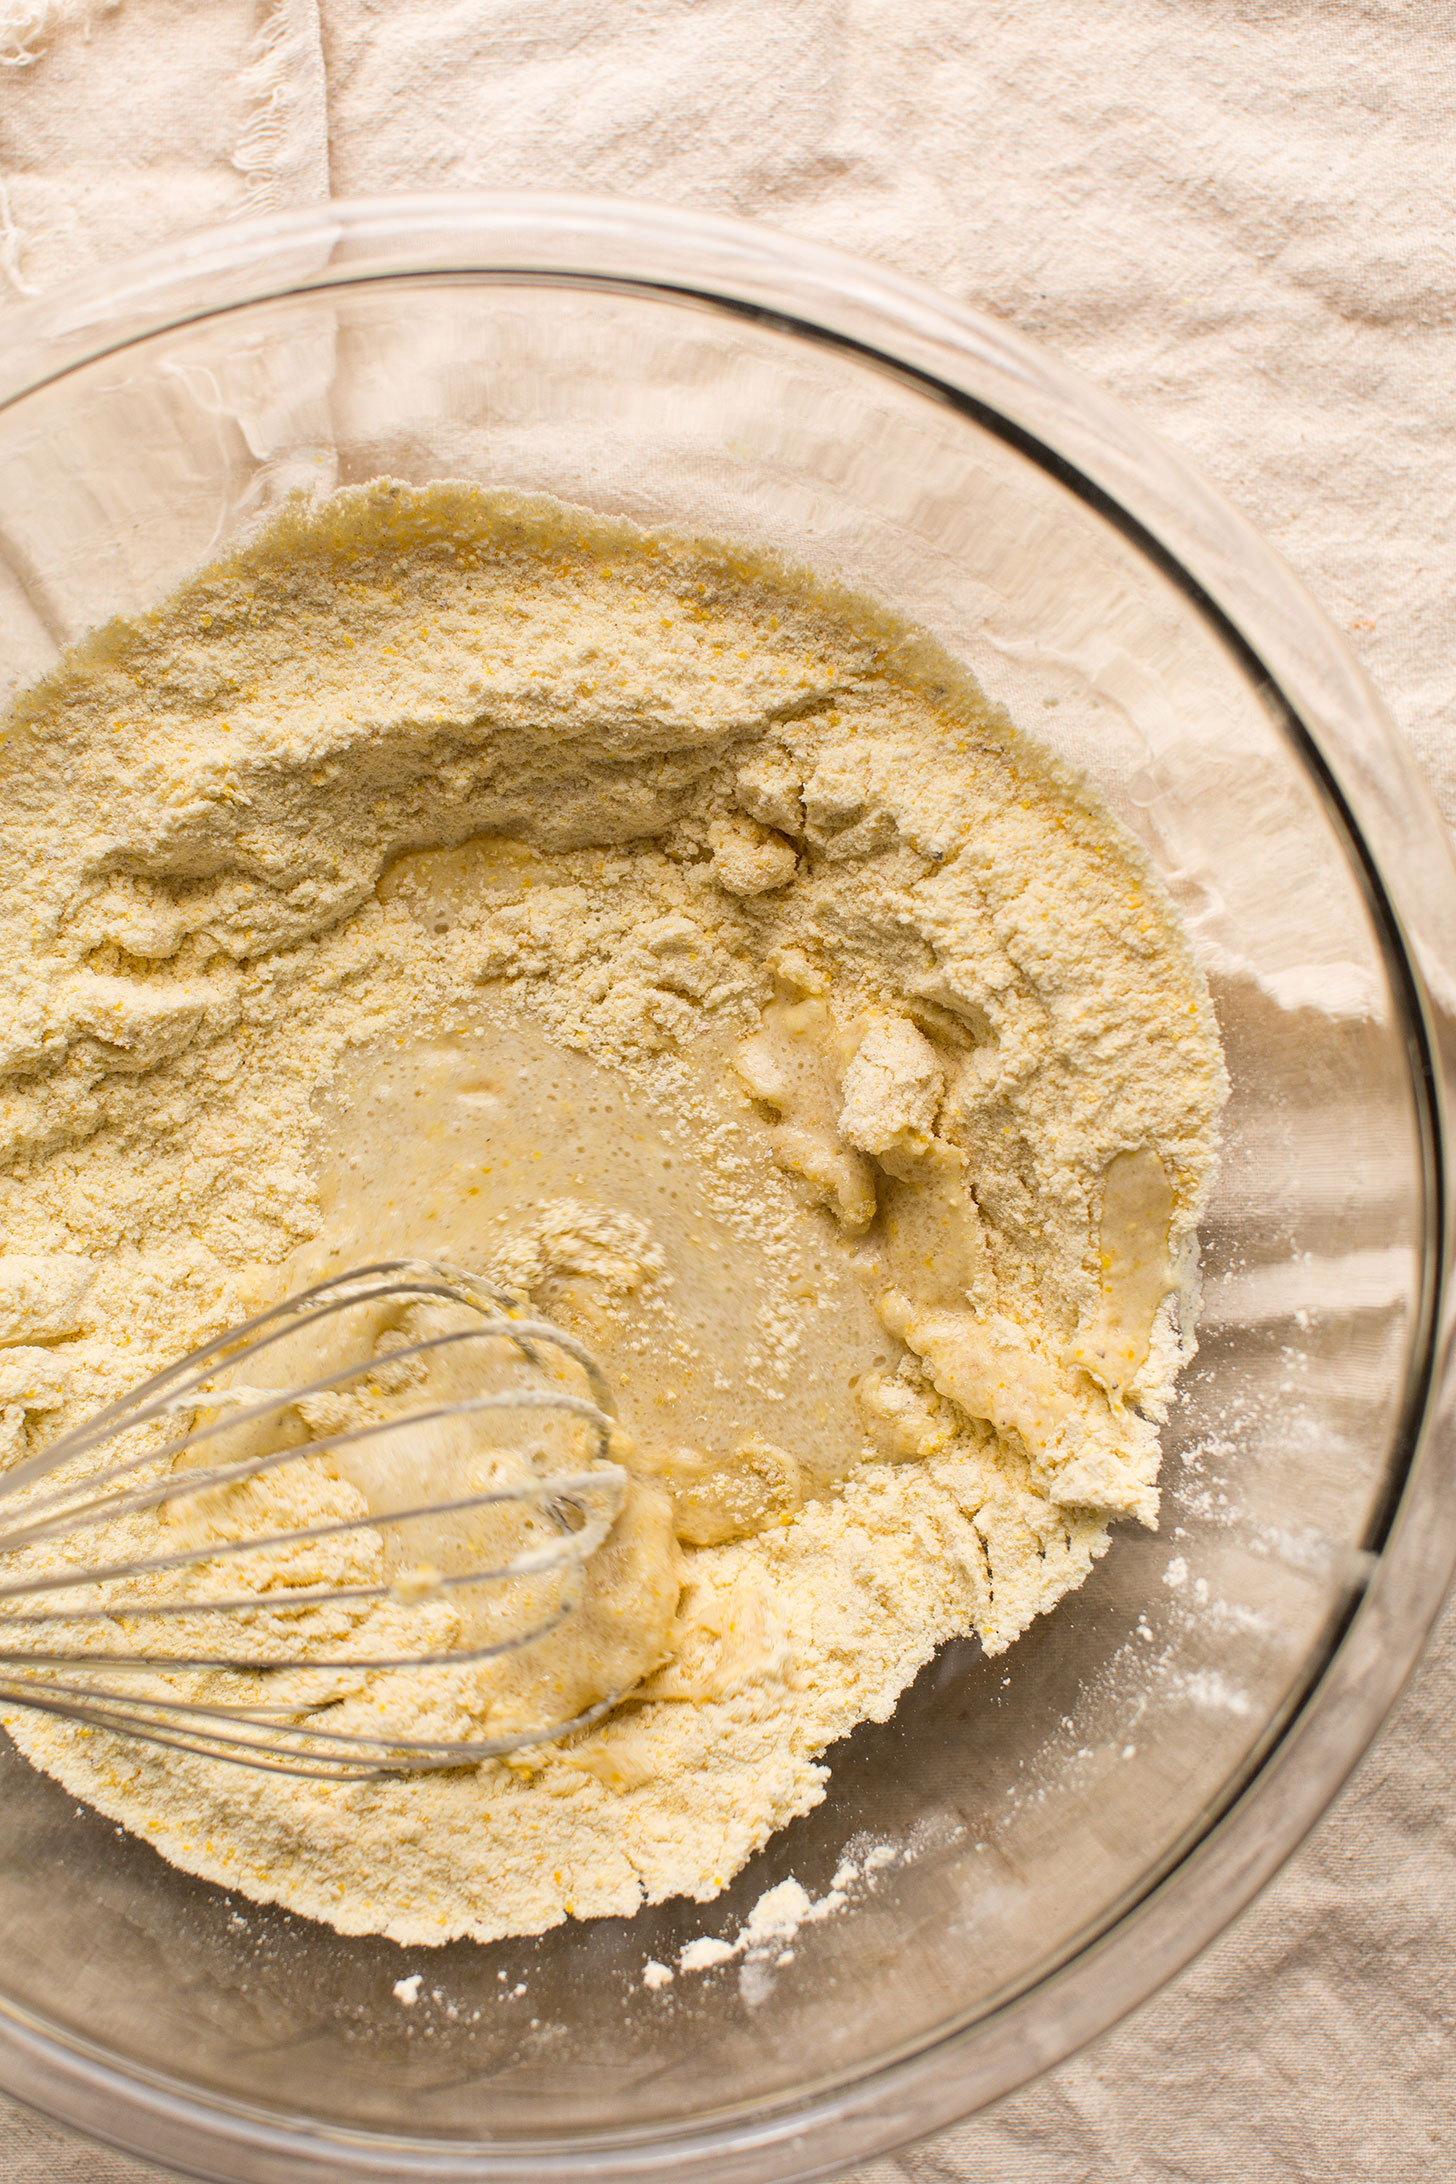 Whisking wet ingredients into dry for crumbly gluten-free vegan cornbread